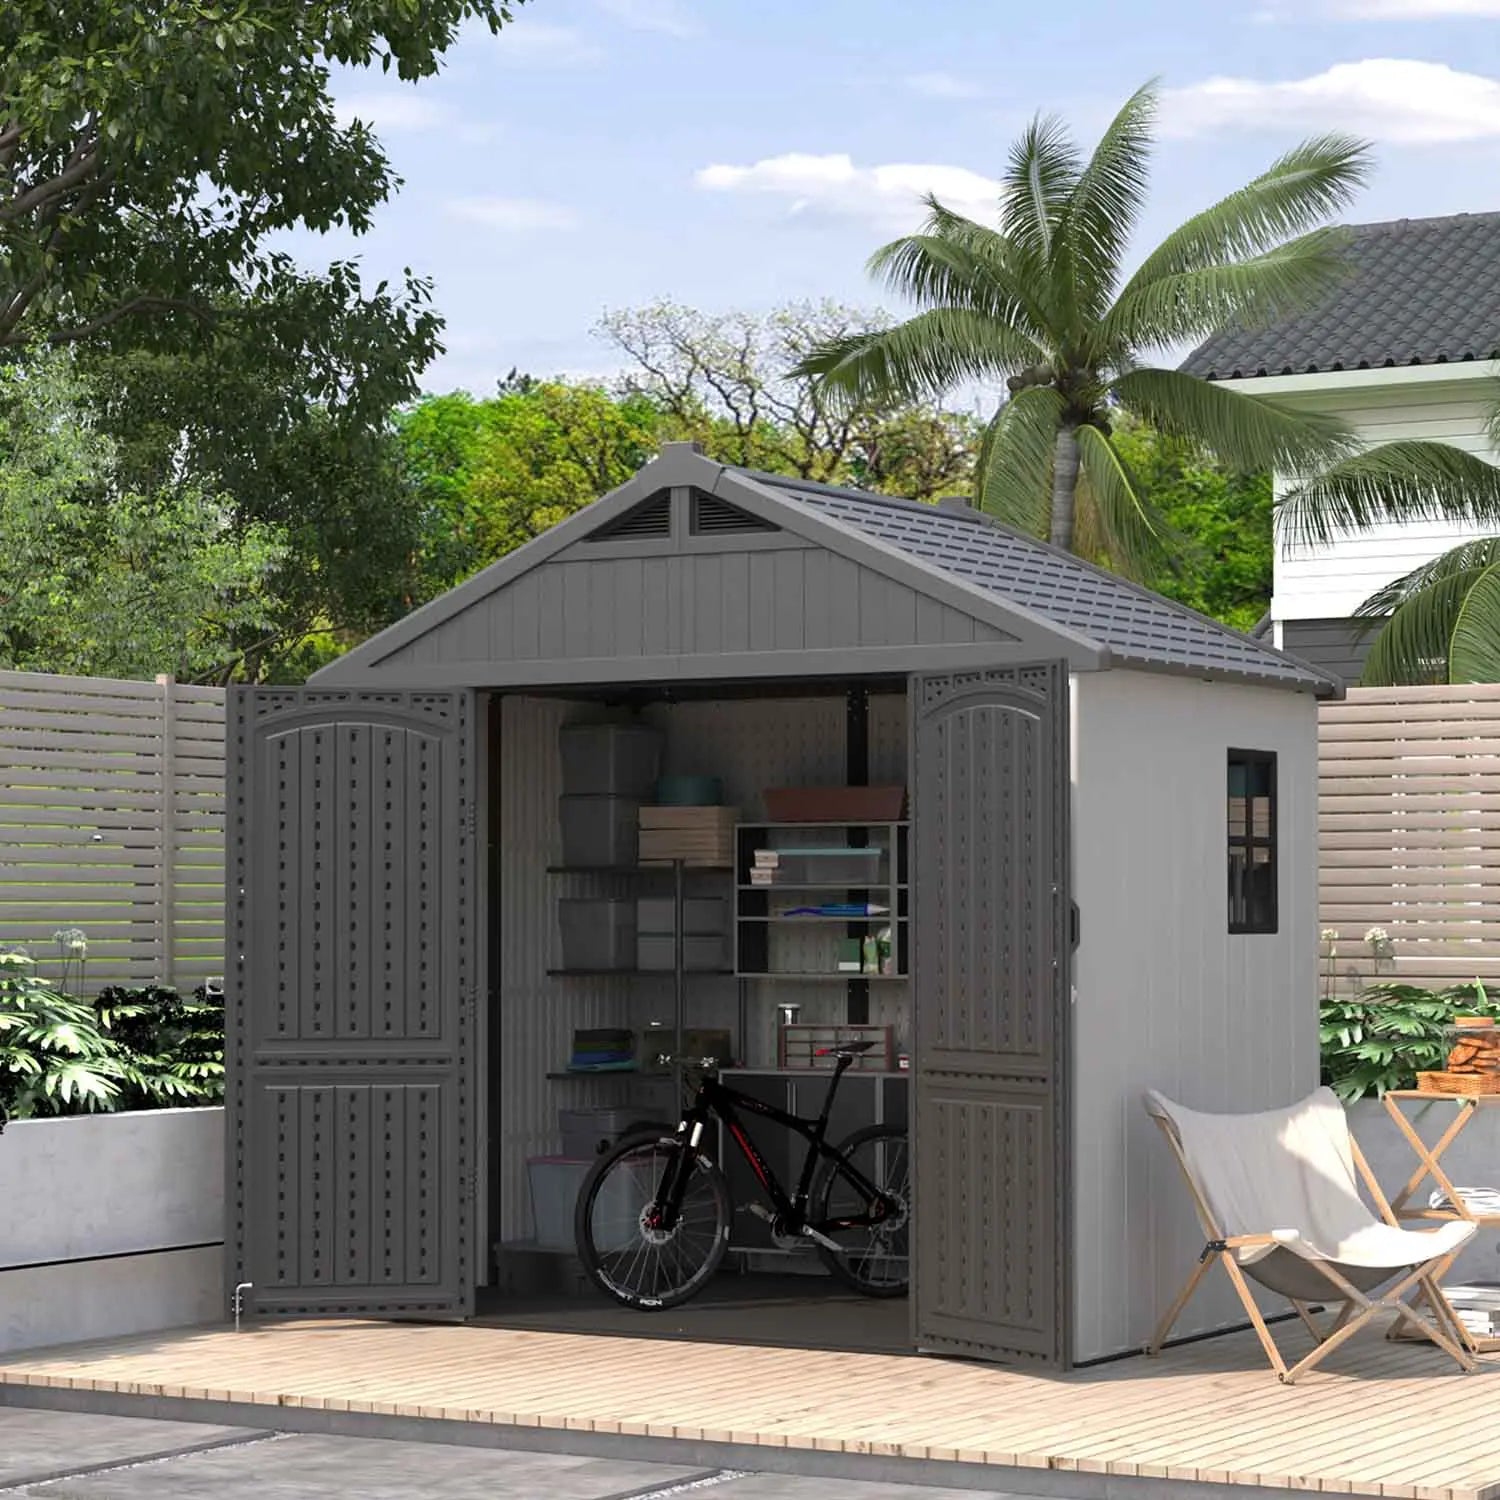 8x6 plastic storage shed standing in backyard